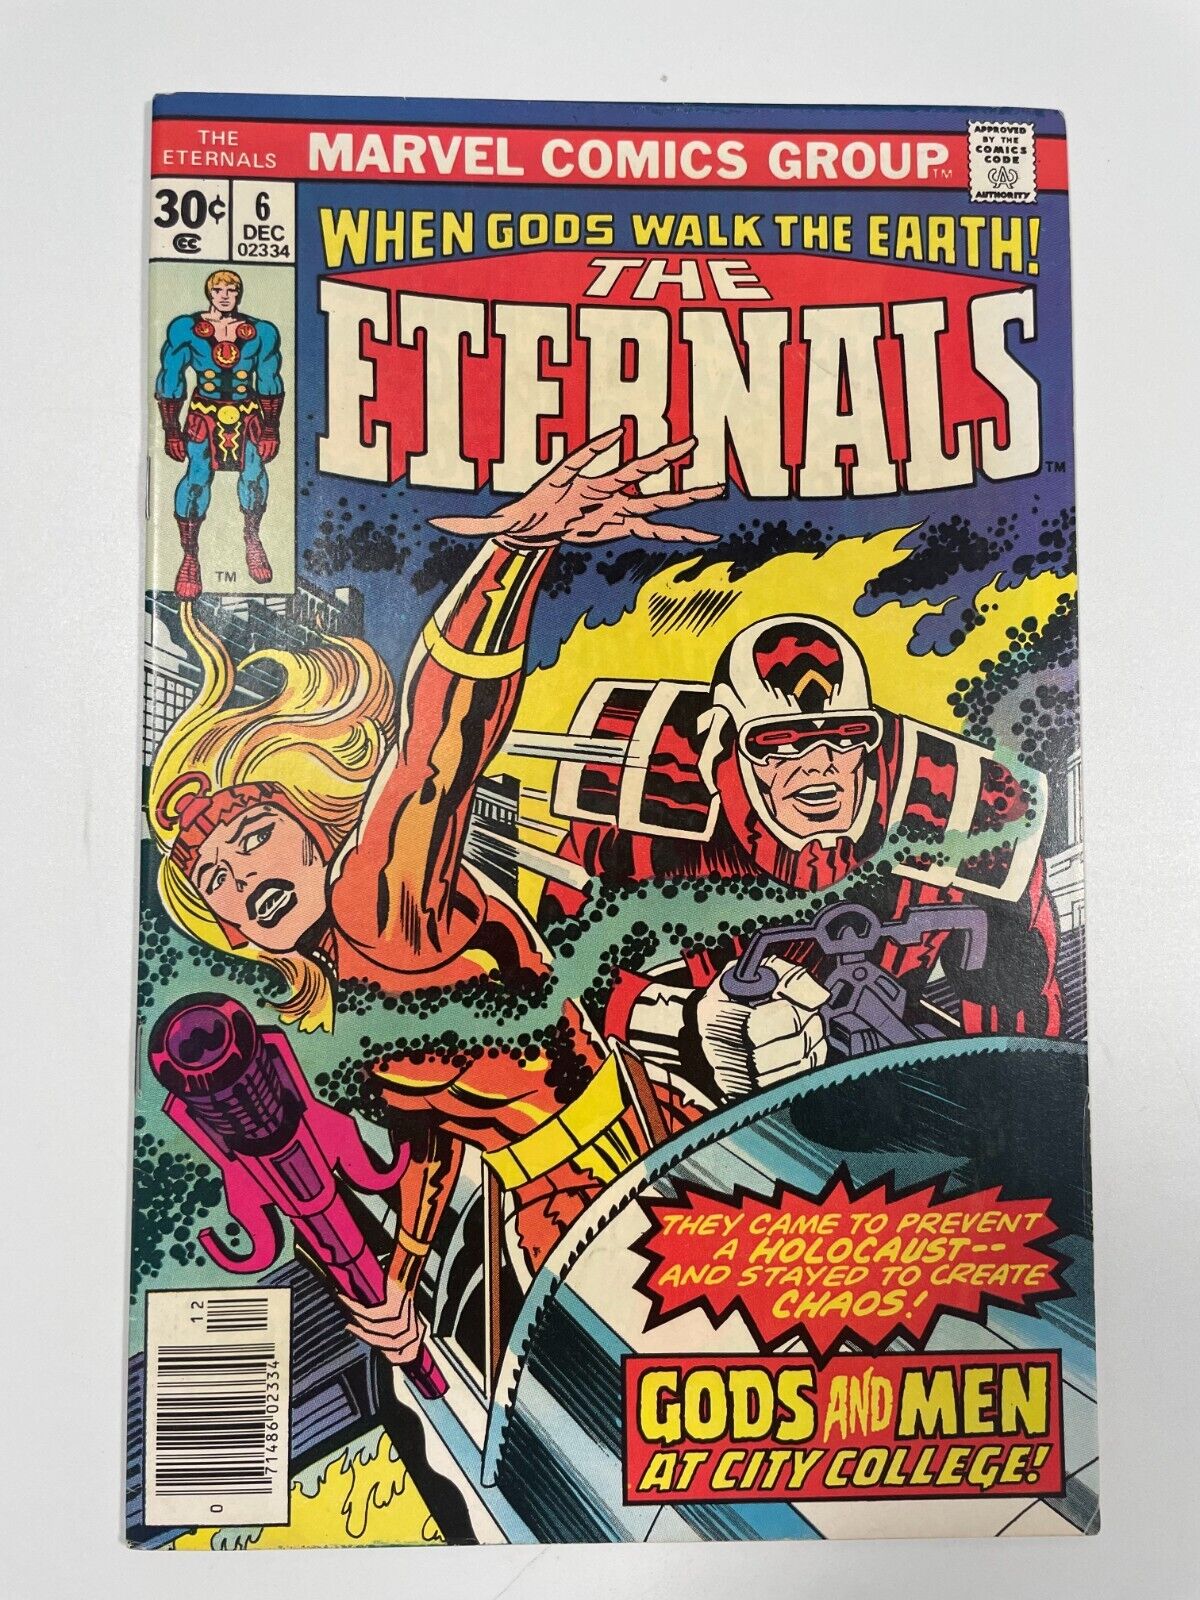 The Eternals #6 - Jack Kirby - Mike Royer - 1976 - Marvel Comics